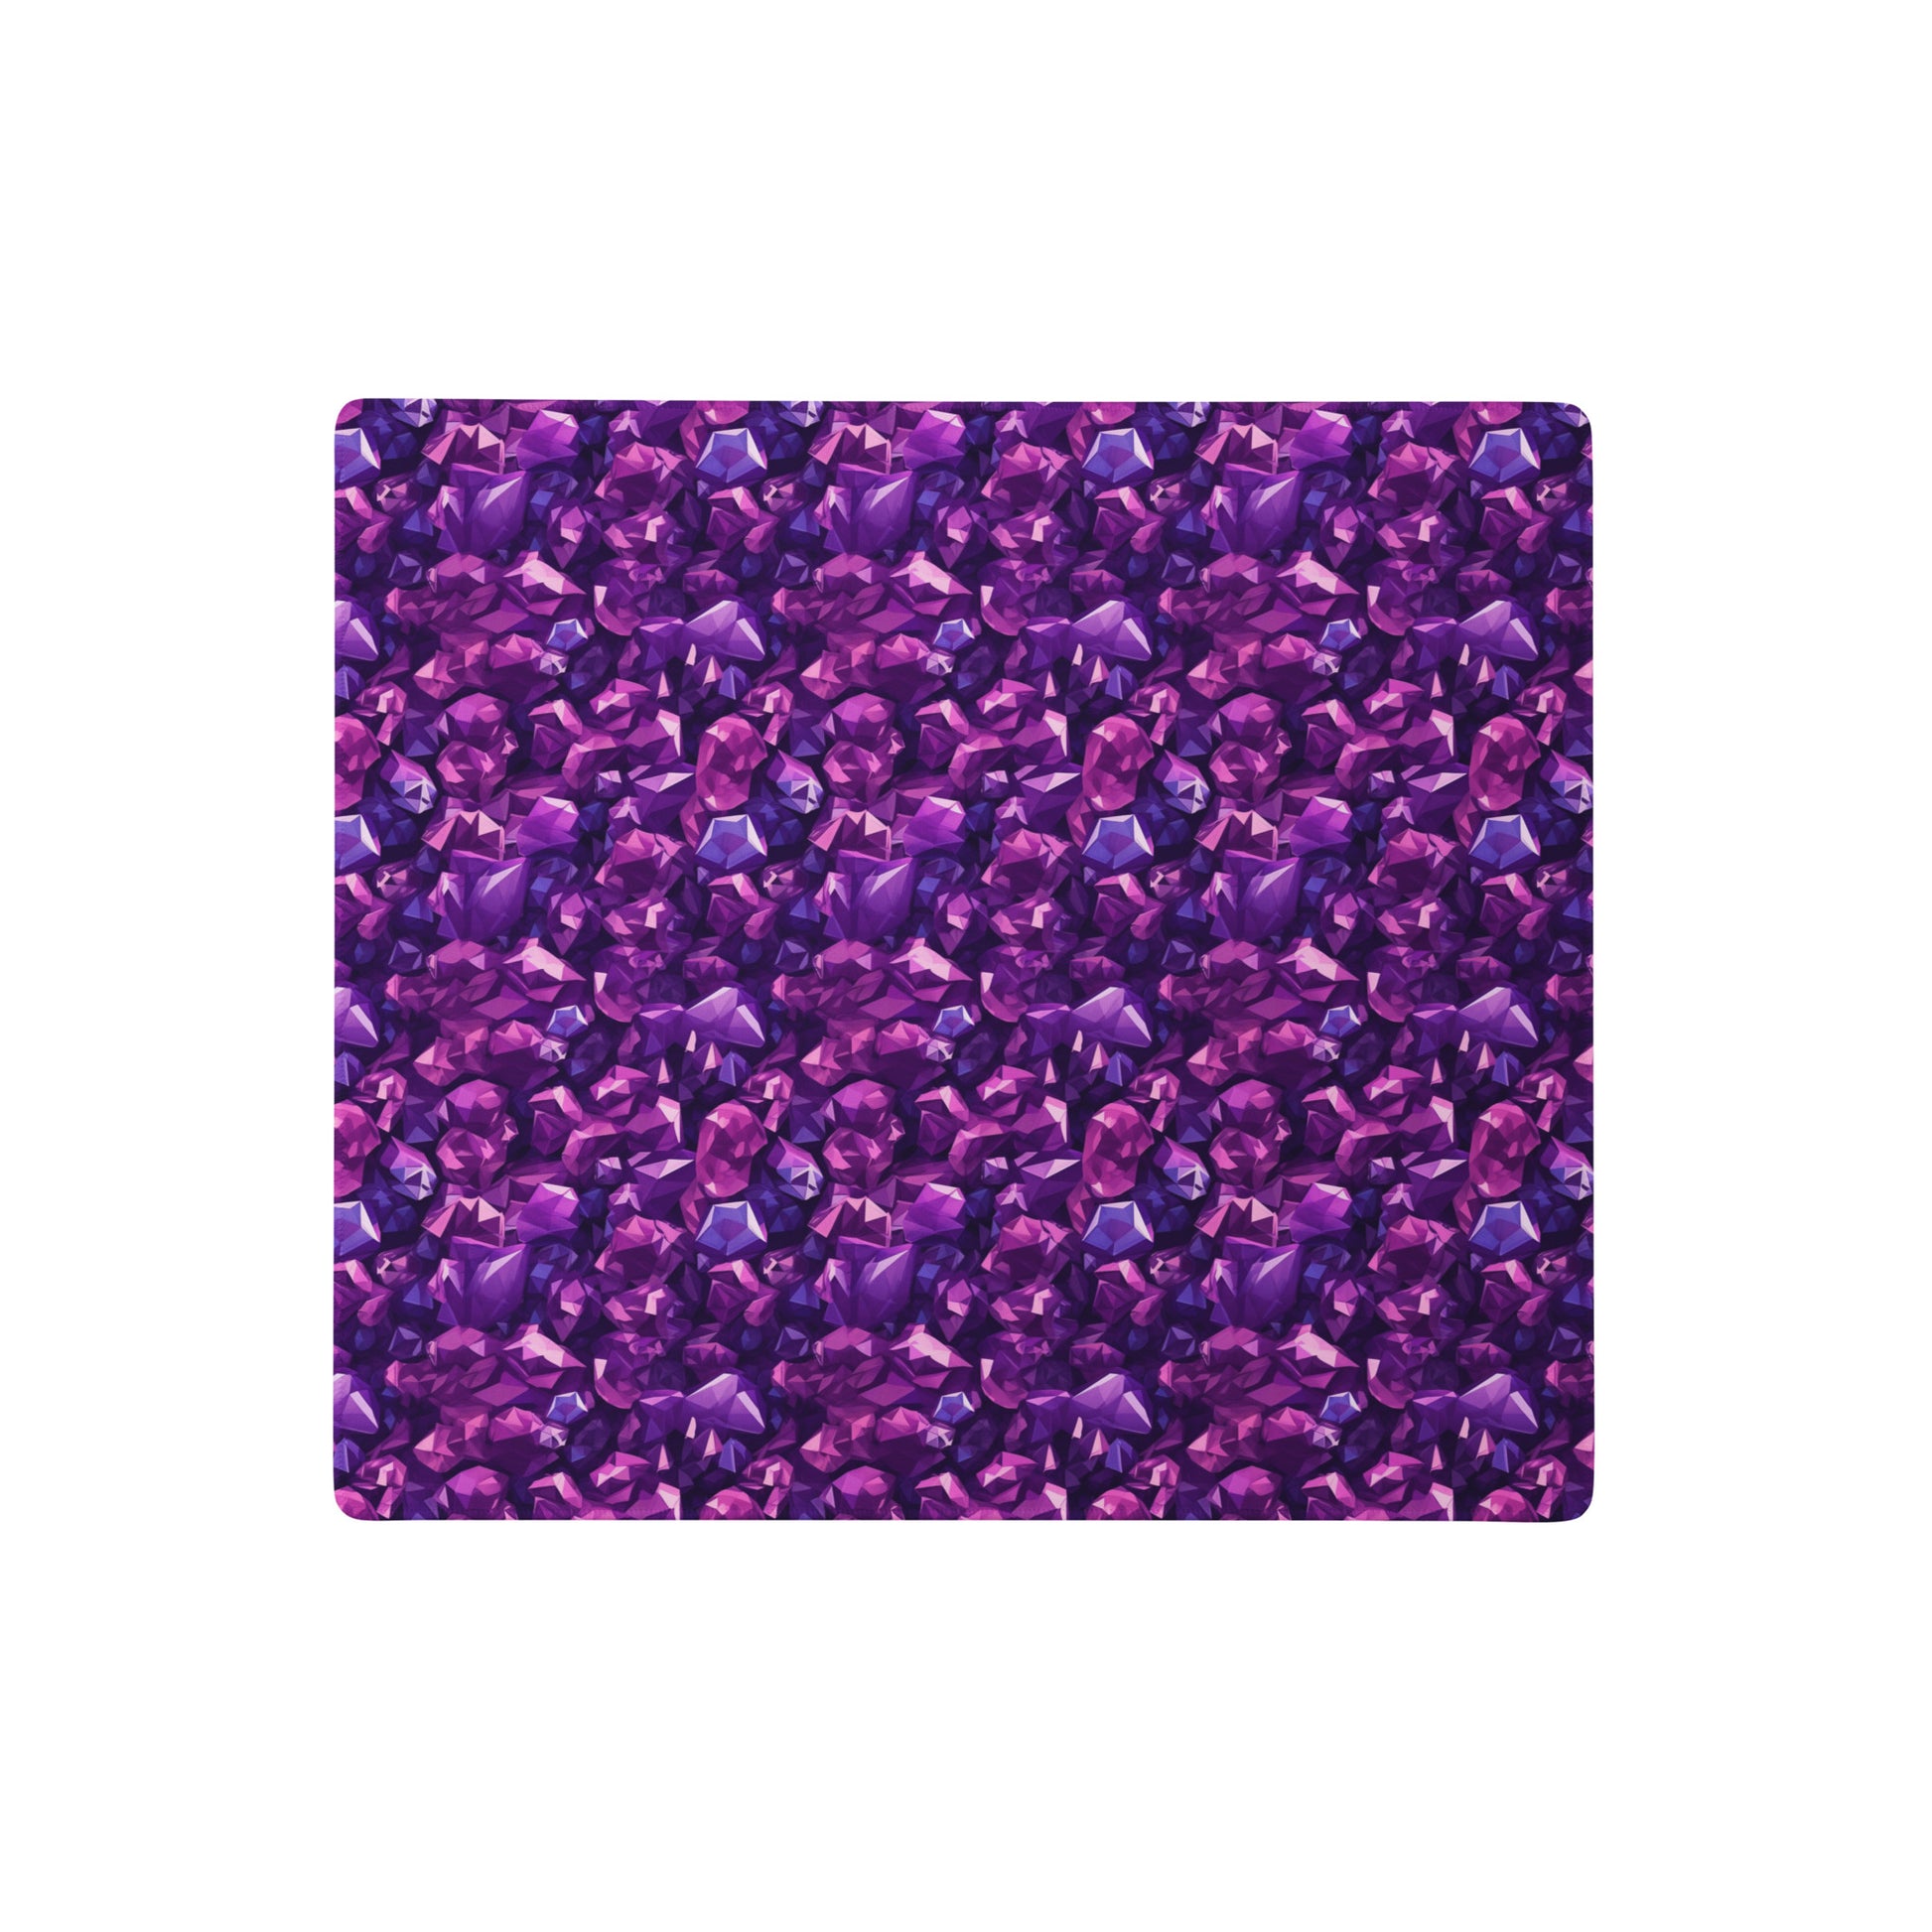 An 18" x 16" gaming desk pad with purple crystals.